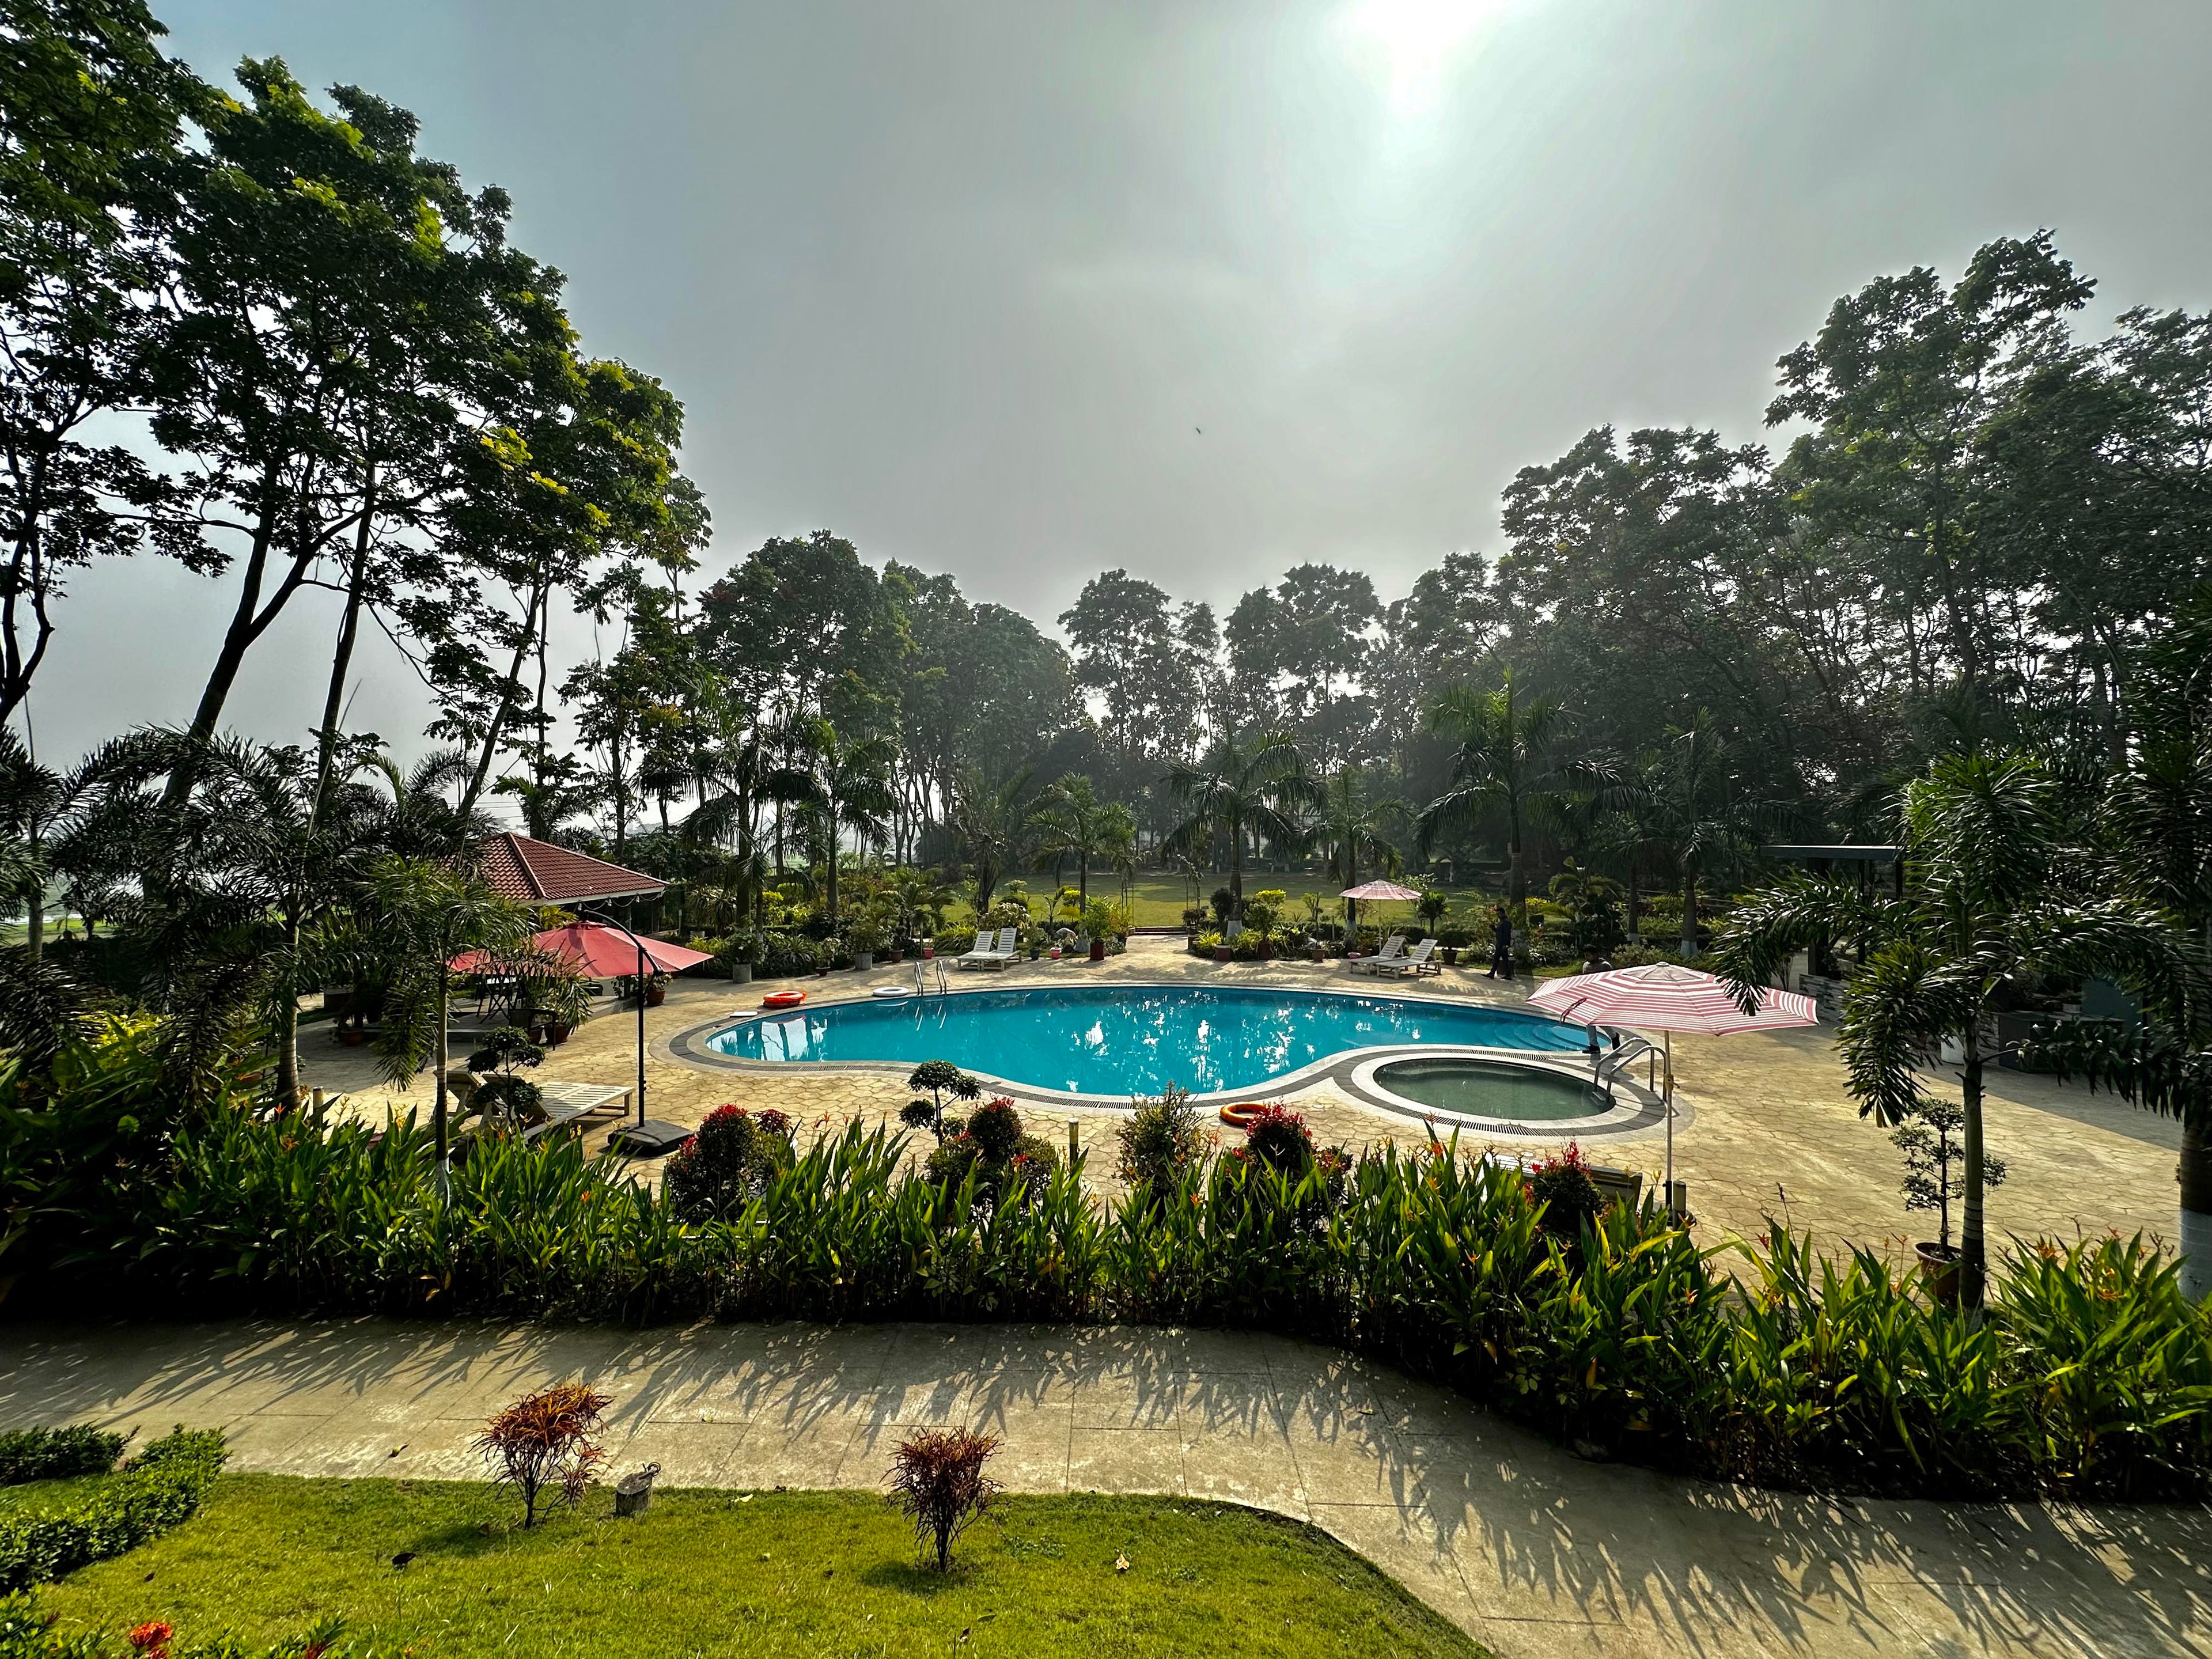 Load video: Video tour of accommodation and facilitiest at Barnochata, a picturesque resort and Dhaka hotel located in Savar